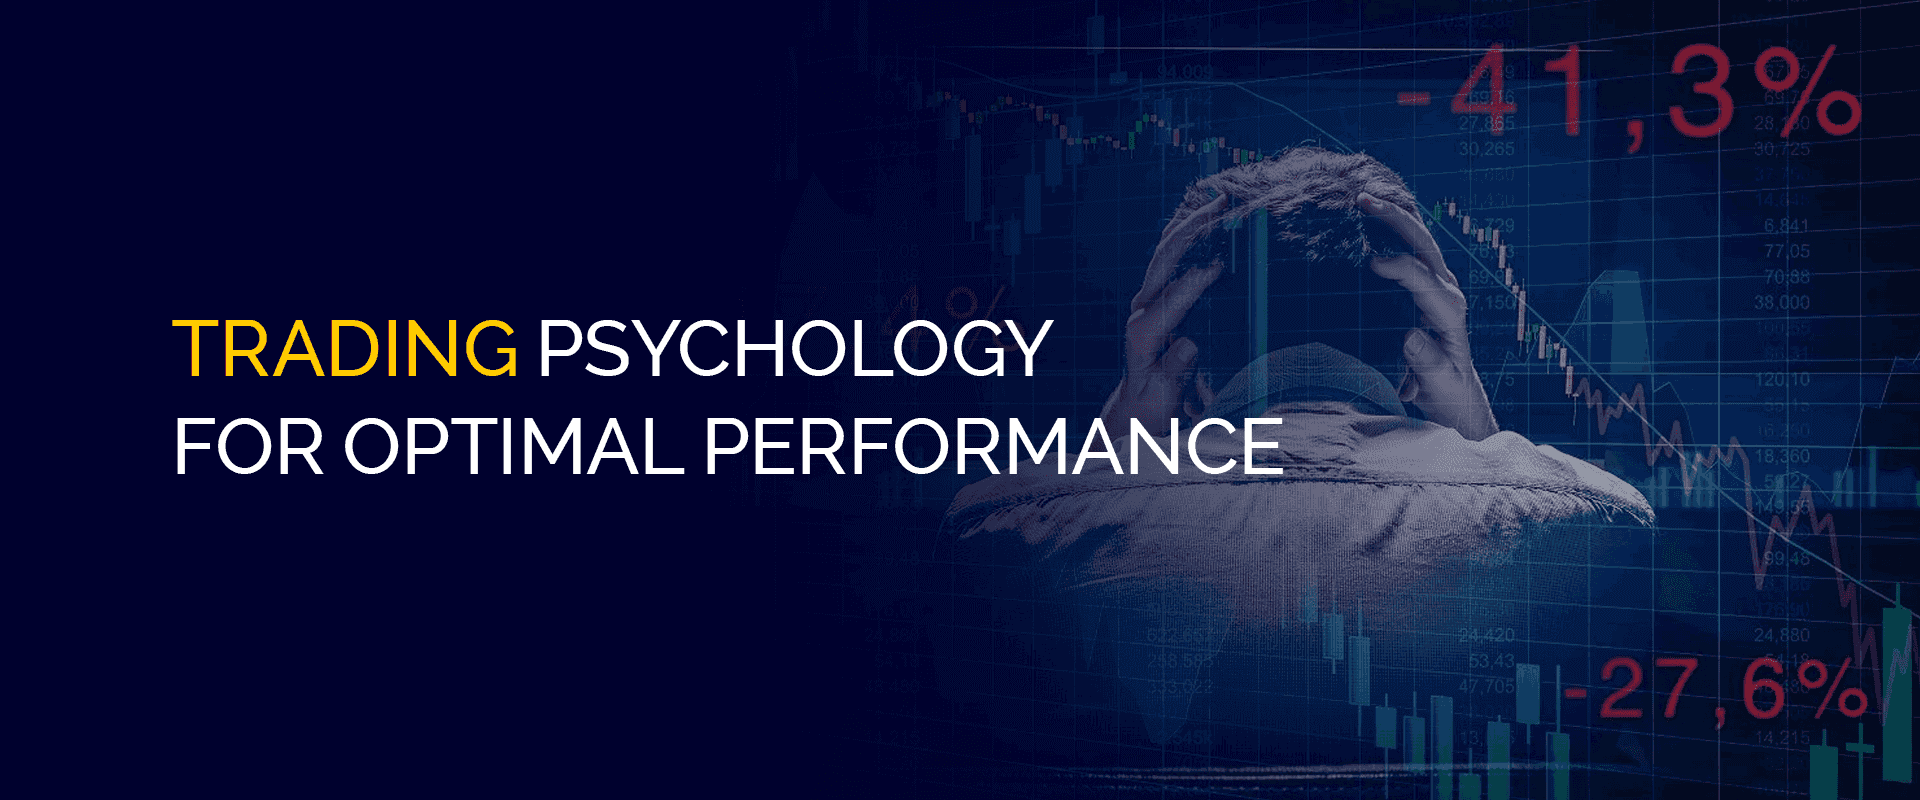 Trading Psychology for Optimal Performance